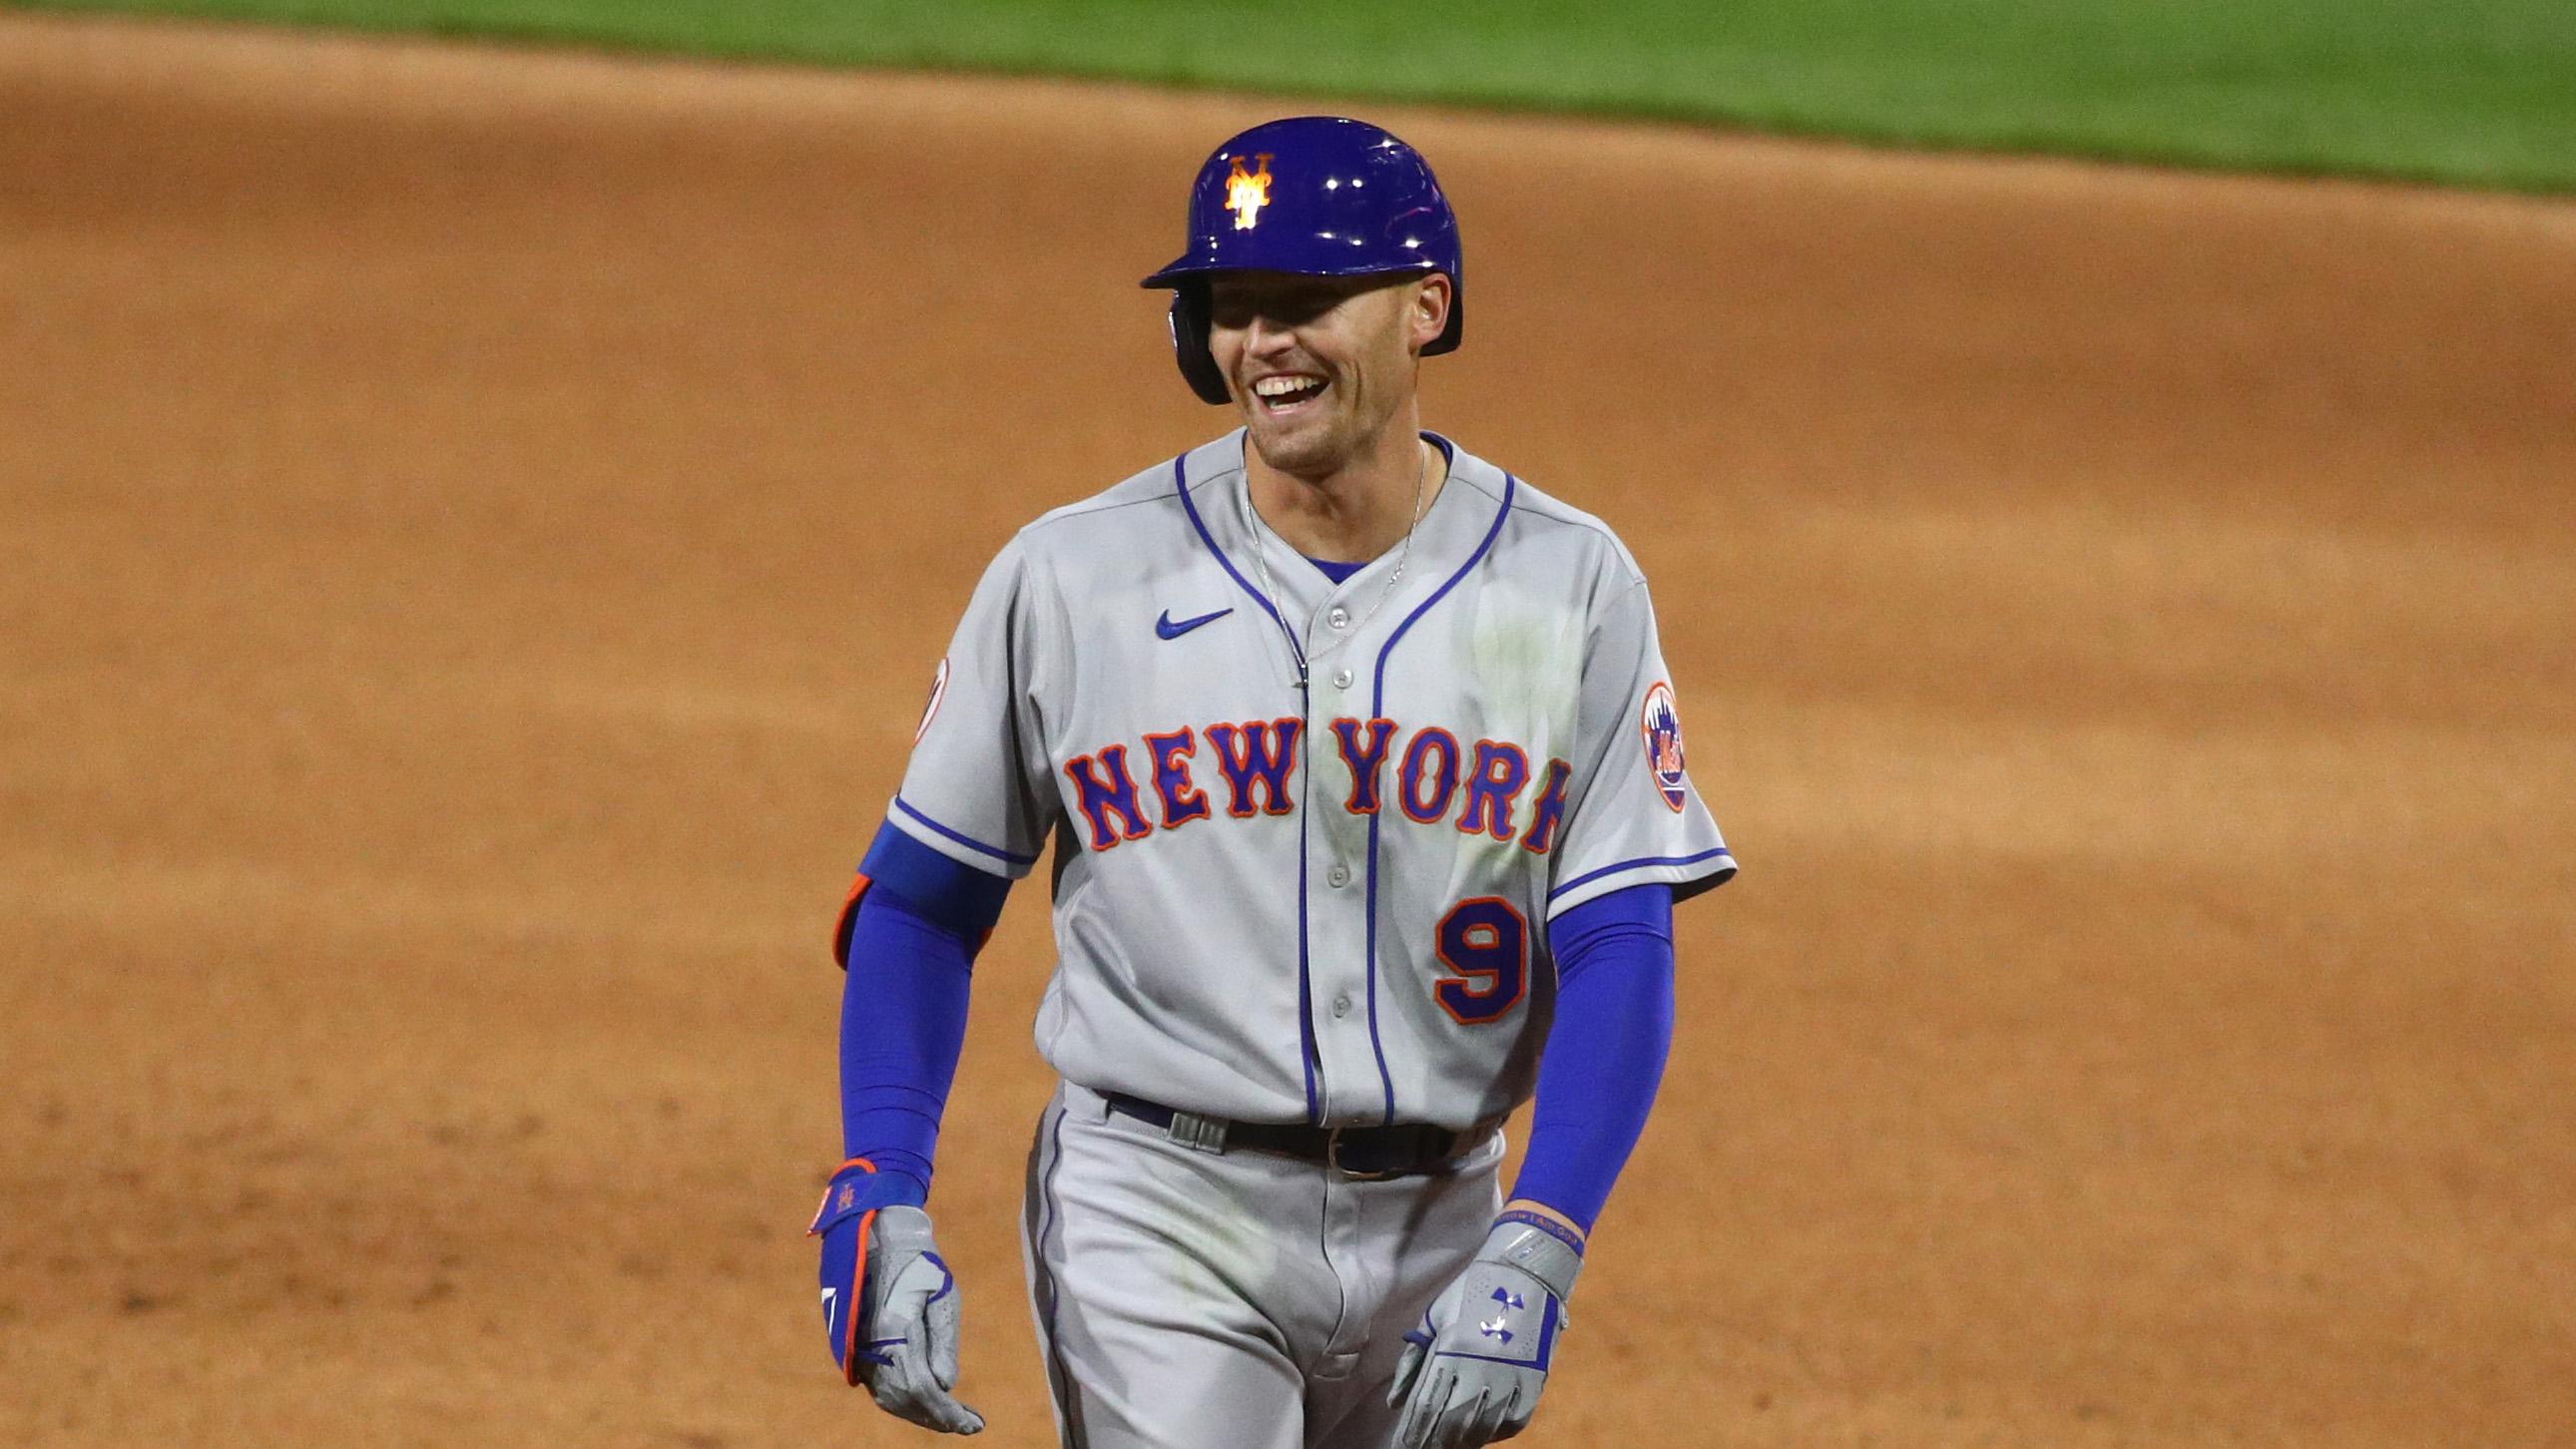 Apr 5, 2021; Philadelphia, Pennsylvania, USA; New York Mets outfielder Brandon Nimmo (9) reacts after hitting a single in the fourth inning against the Philadelphia Phillies at Citizens Bank Park. / Kyle Ross-USA TODAY Sports